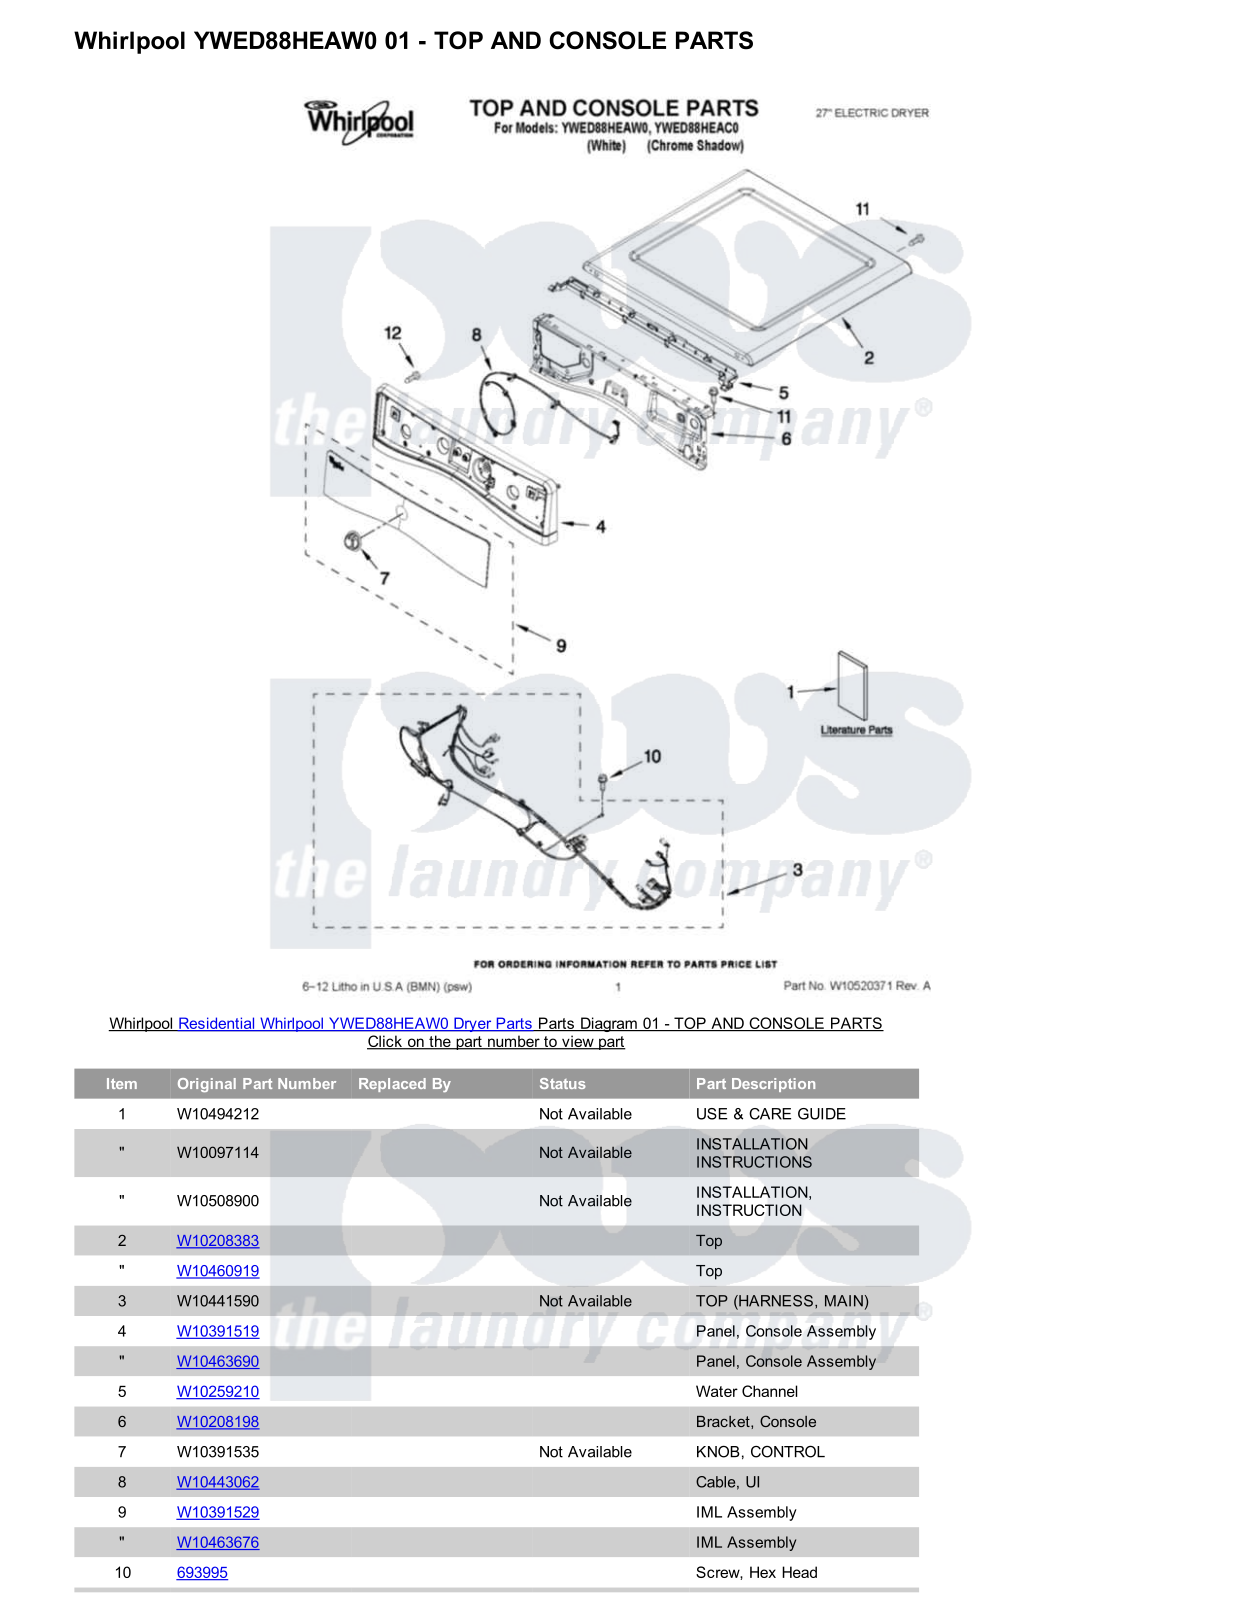 Whirlpool YWED88HEAW0 Parts Diagram